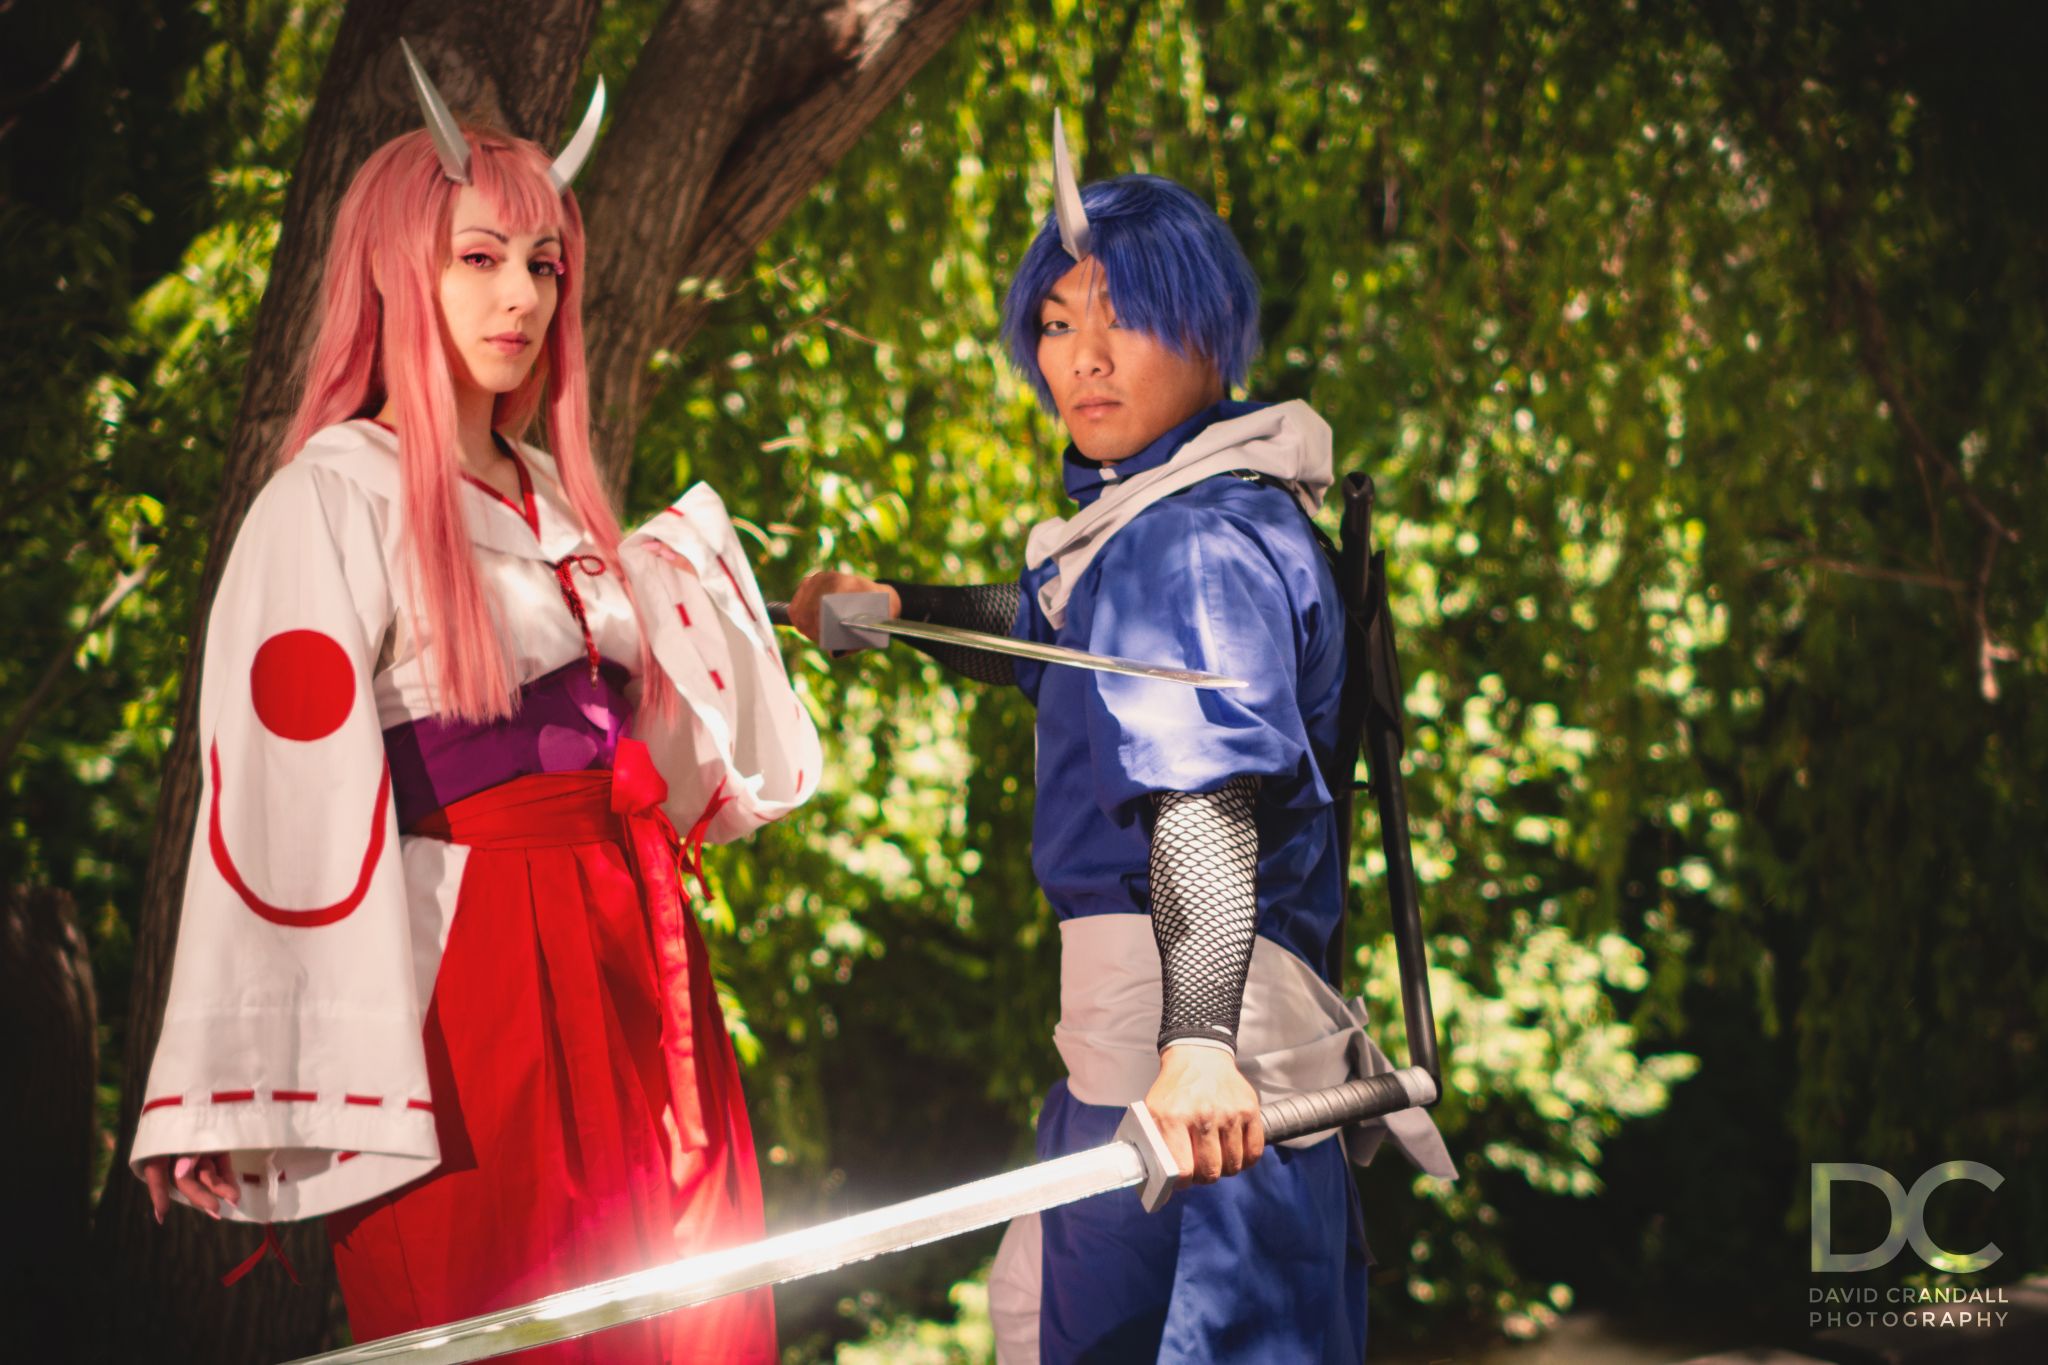 10 Largest Anime Conventions in the United States  Largestorg